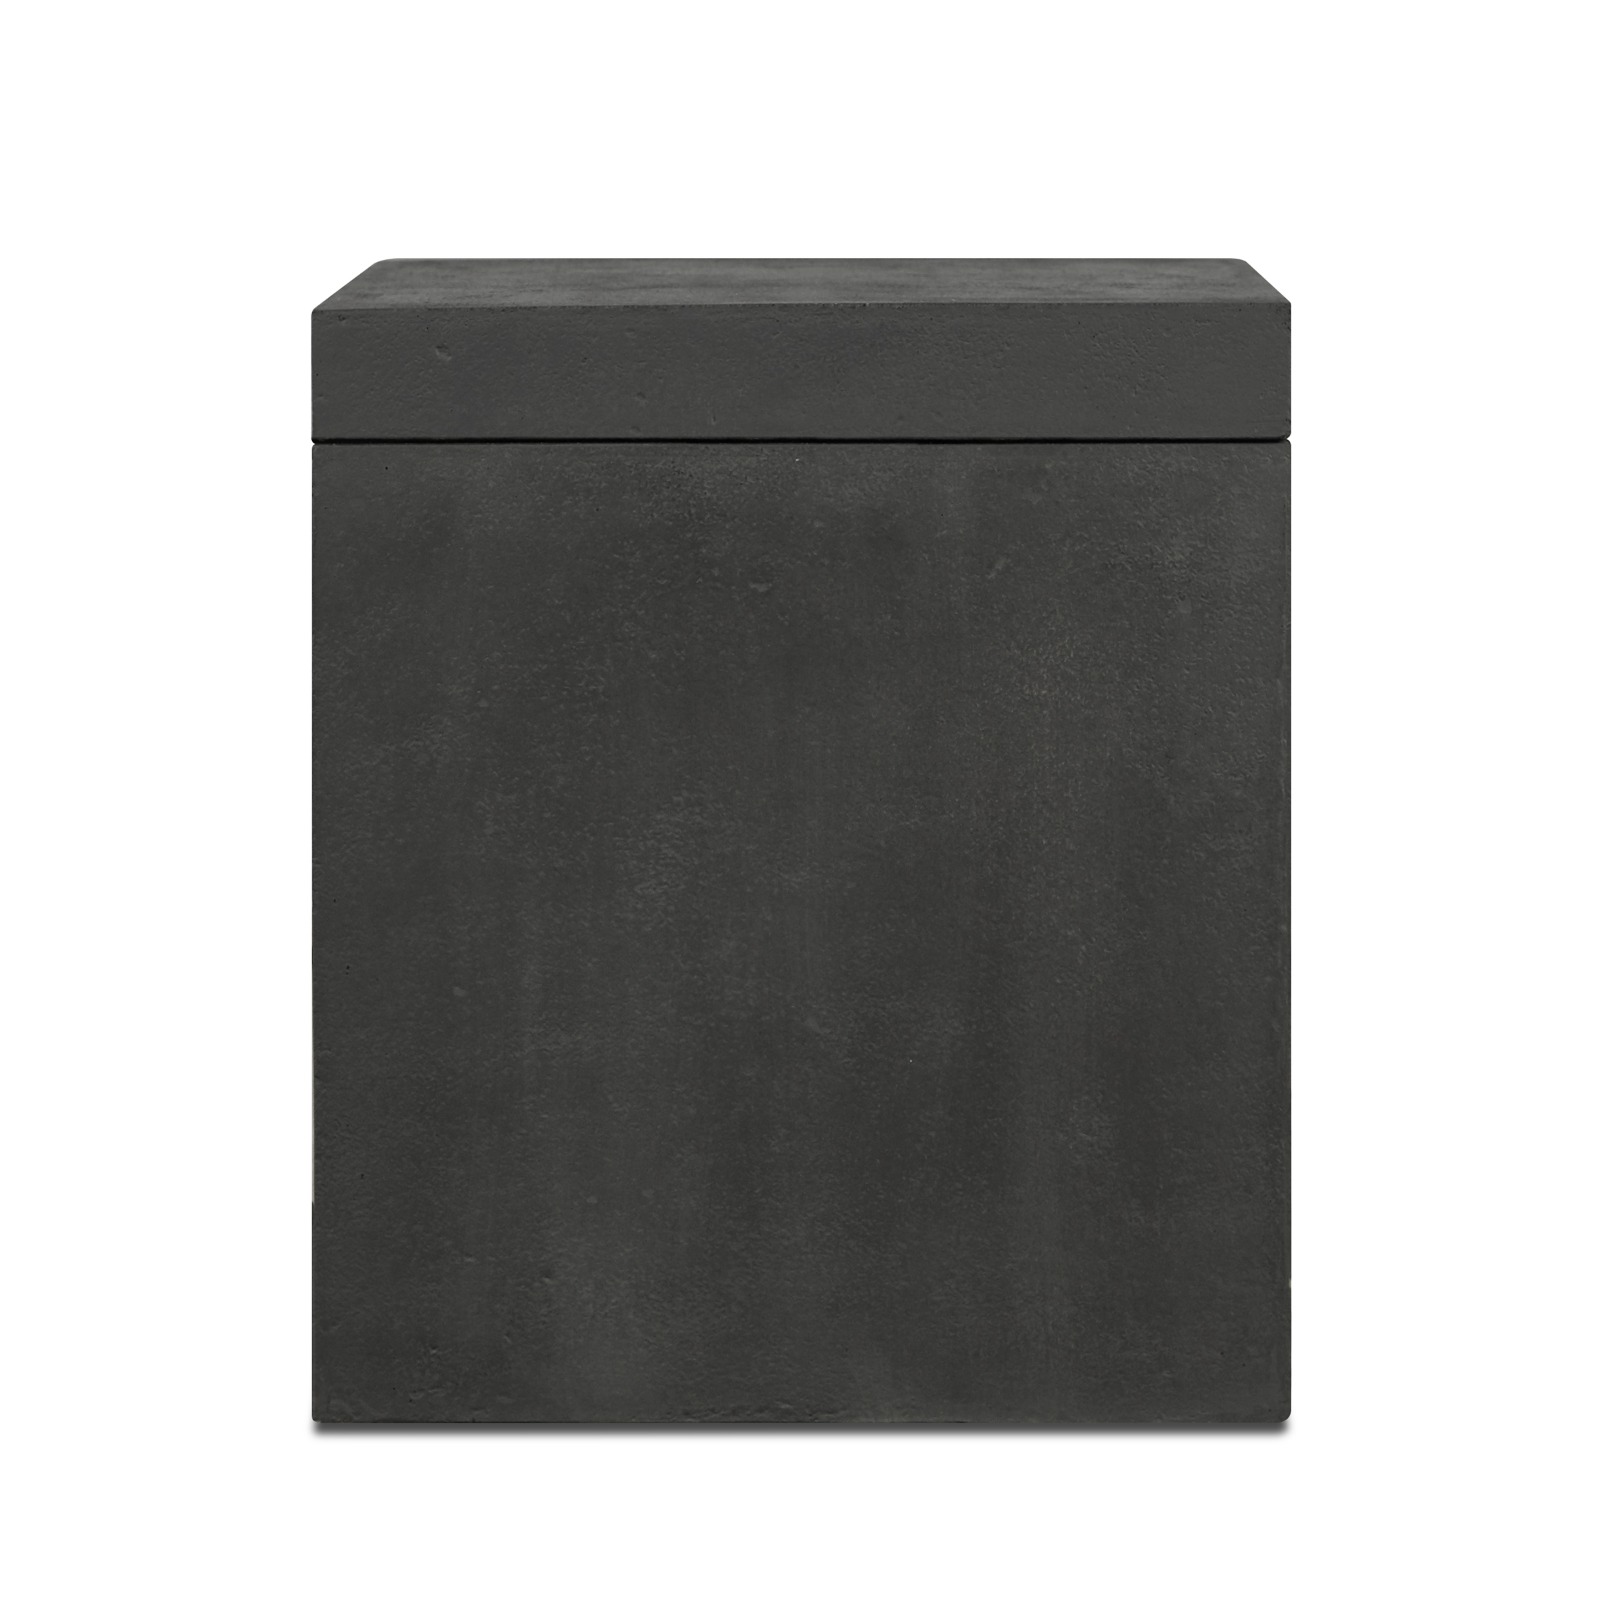 Square GFRC Tank Cover for Outdoor Propane Fire Table Fire Pit Fire Bowl